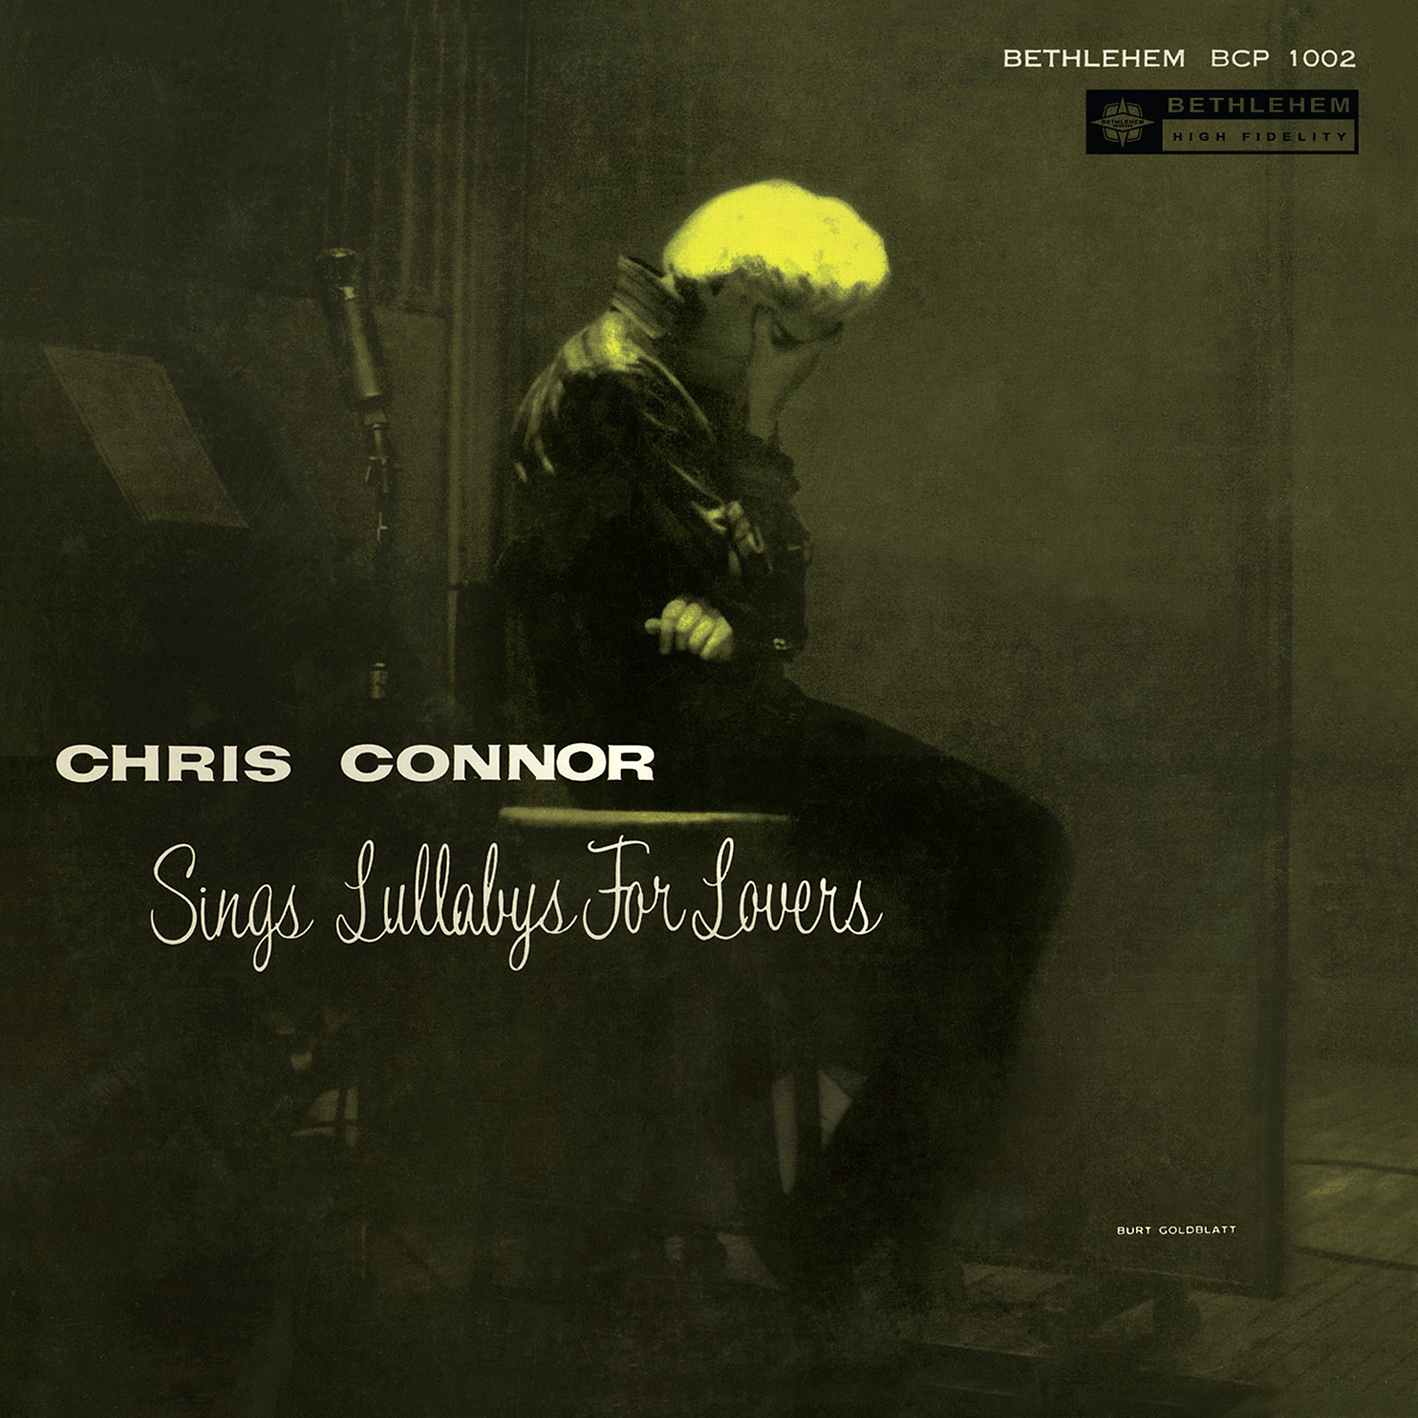 Chris Connor - Chris Connor Sings Lullabys For Lovers (1954/2013) [PrestoClassical FLAC 24bit/96kHz]